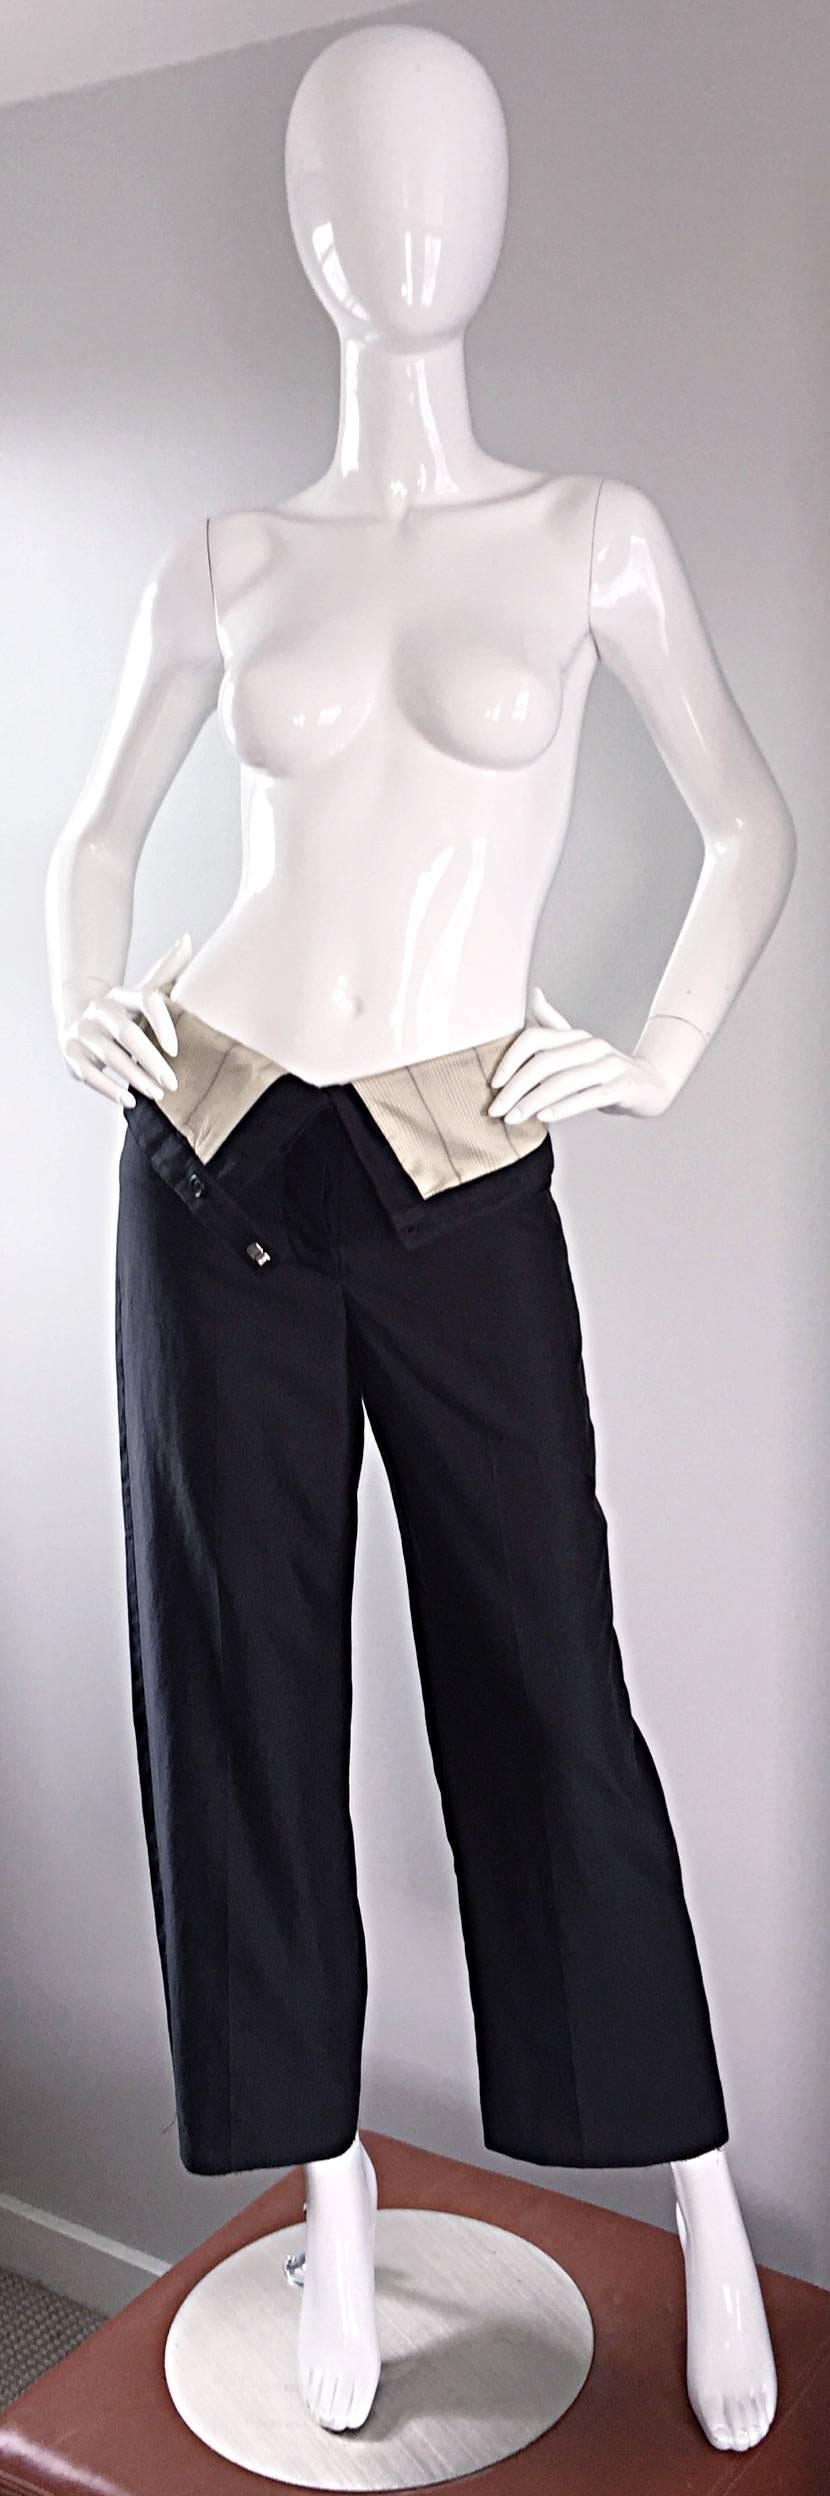 Women's Important Rare Alexander McQueen Vintage 1990s Ultra High Waisted Black Pants  For Sale